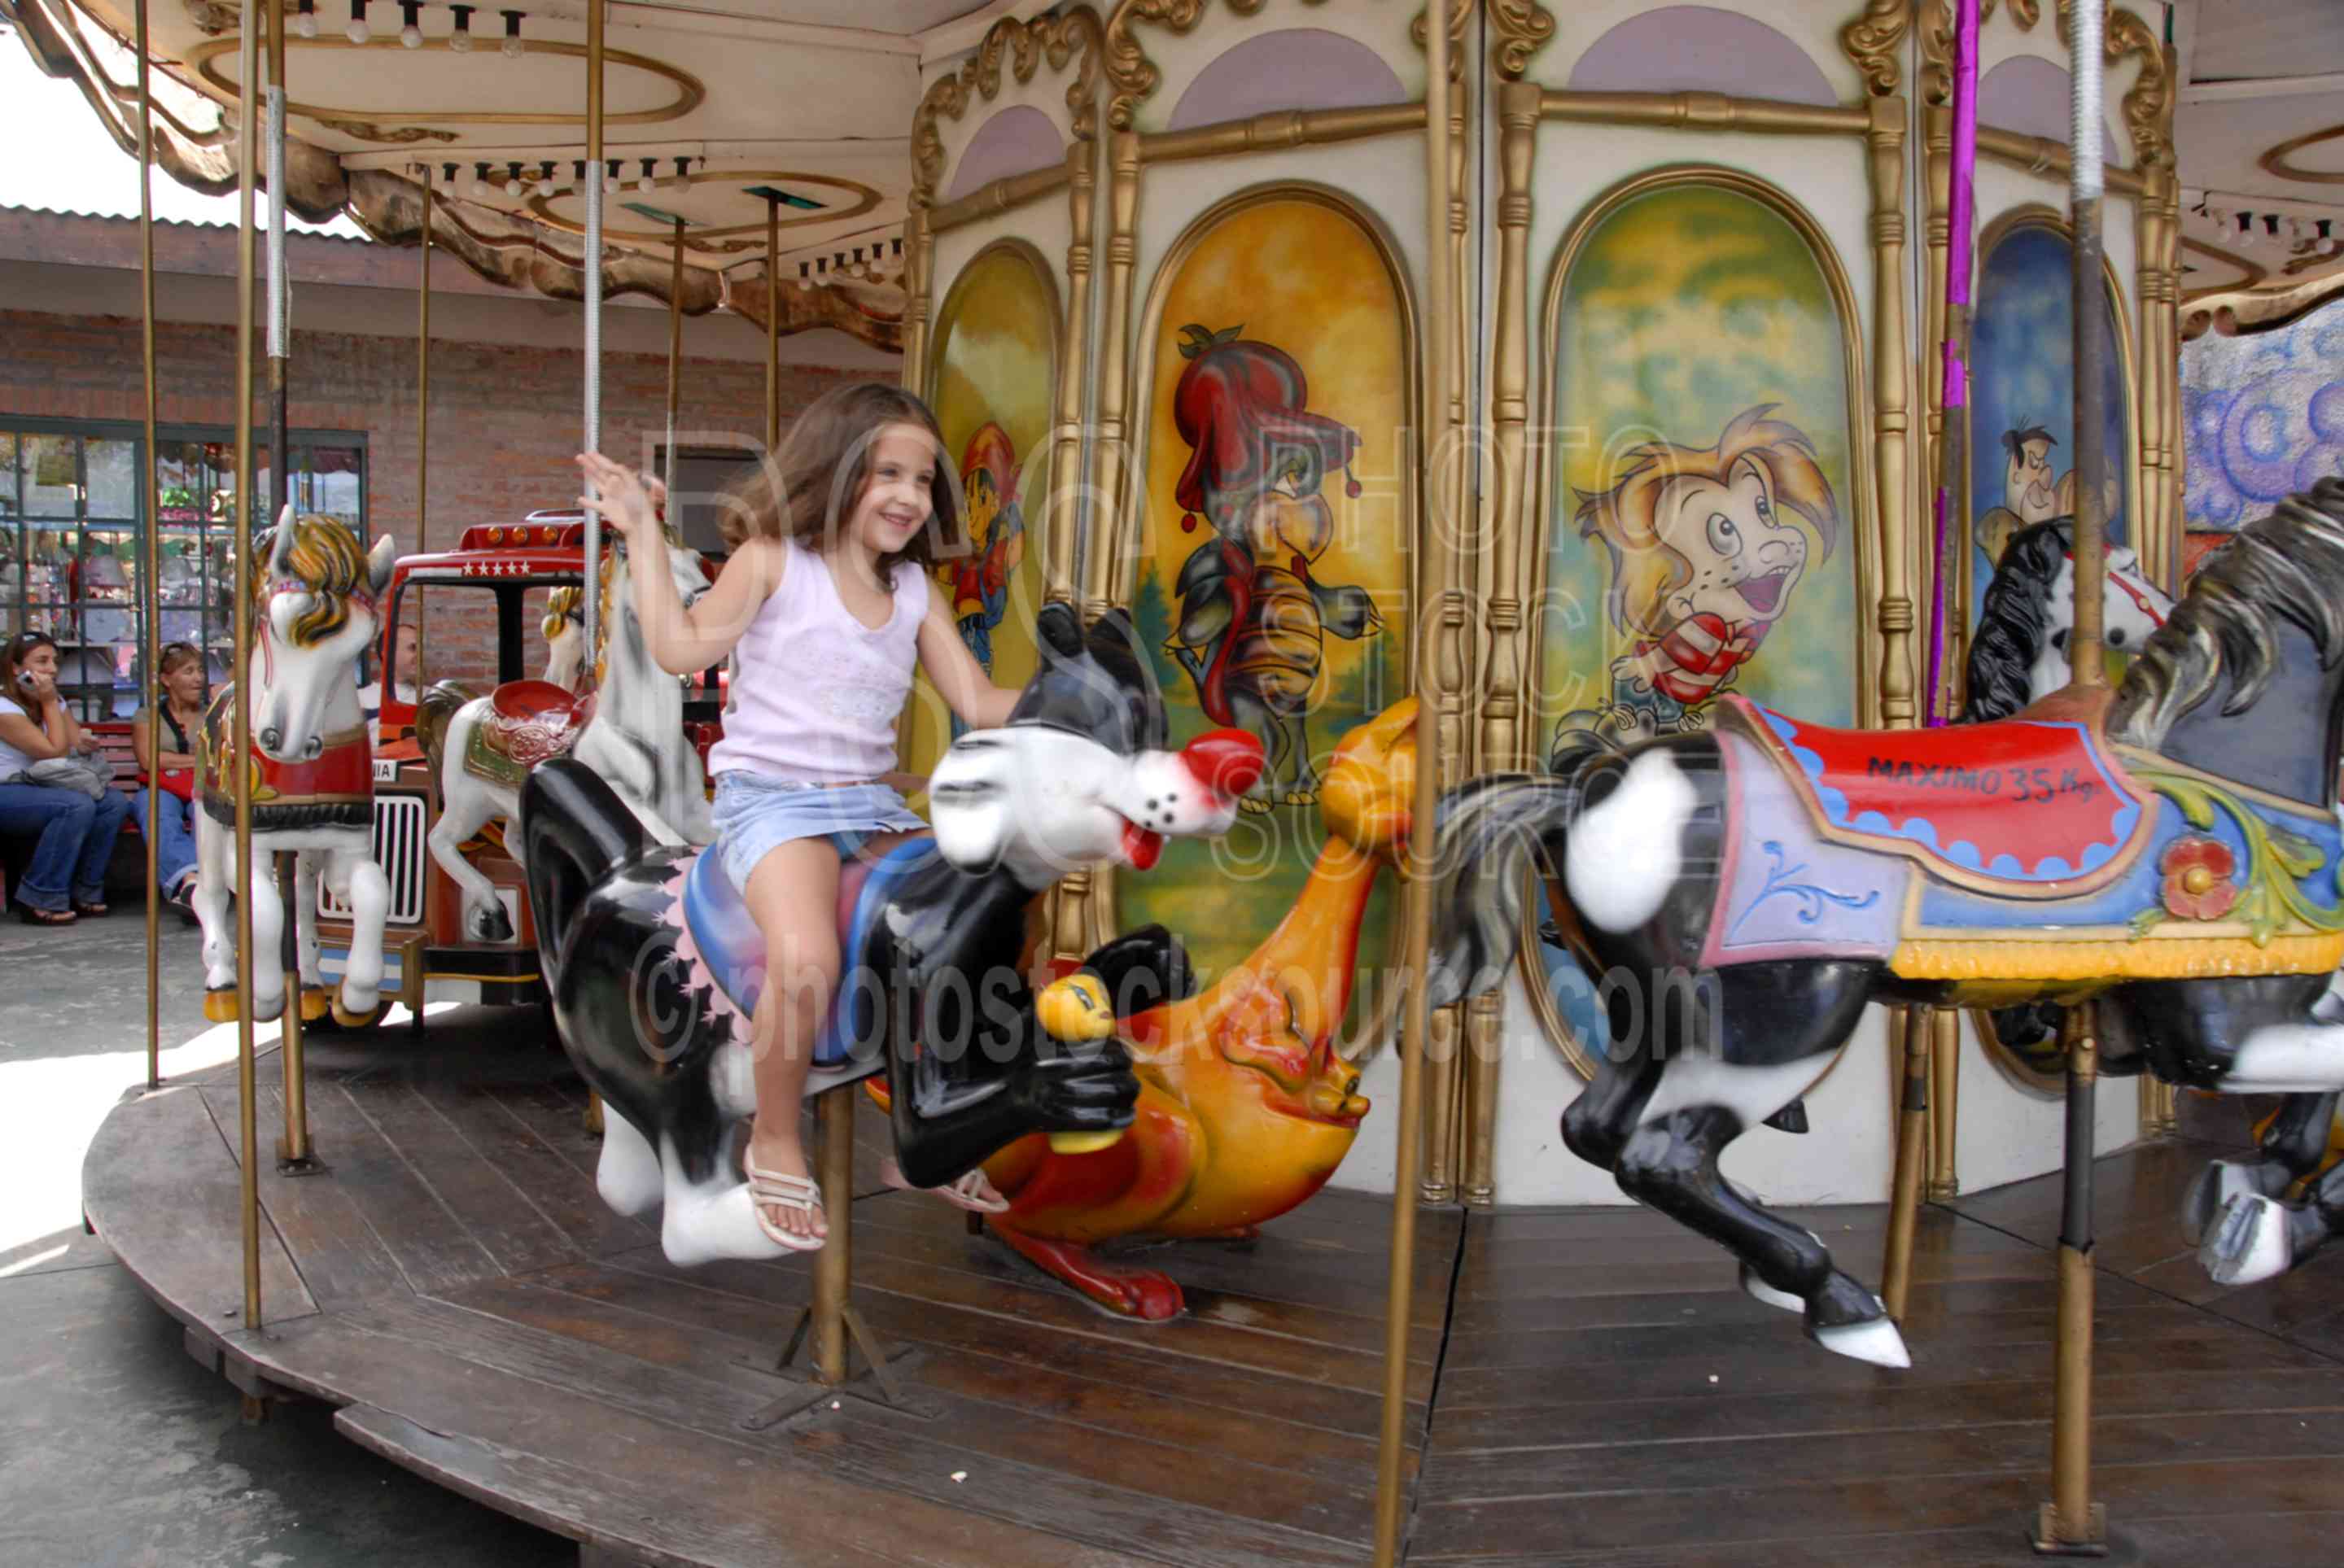 On the Carousel,girl,child,play,playing,recreation,carousel,entertainment,children